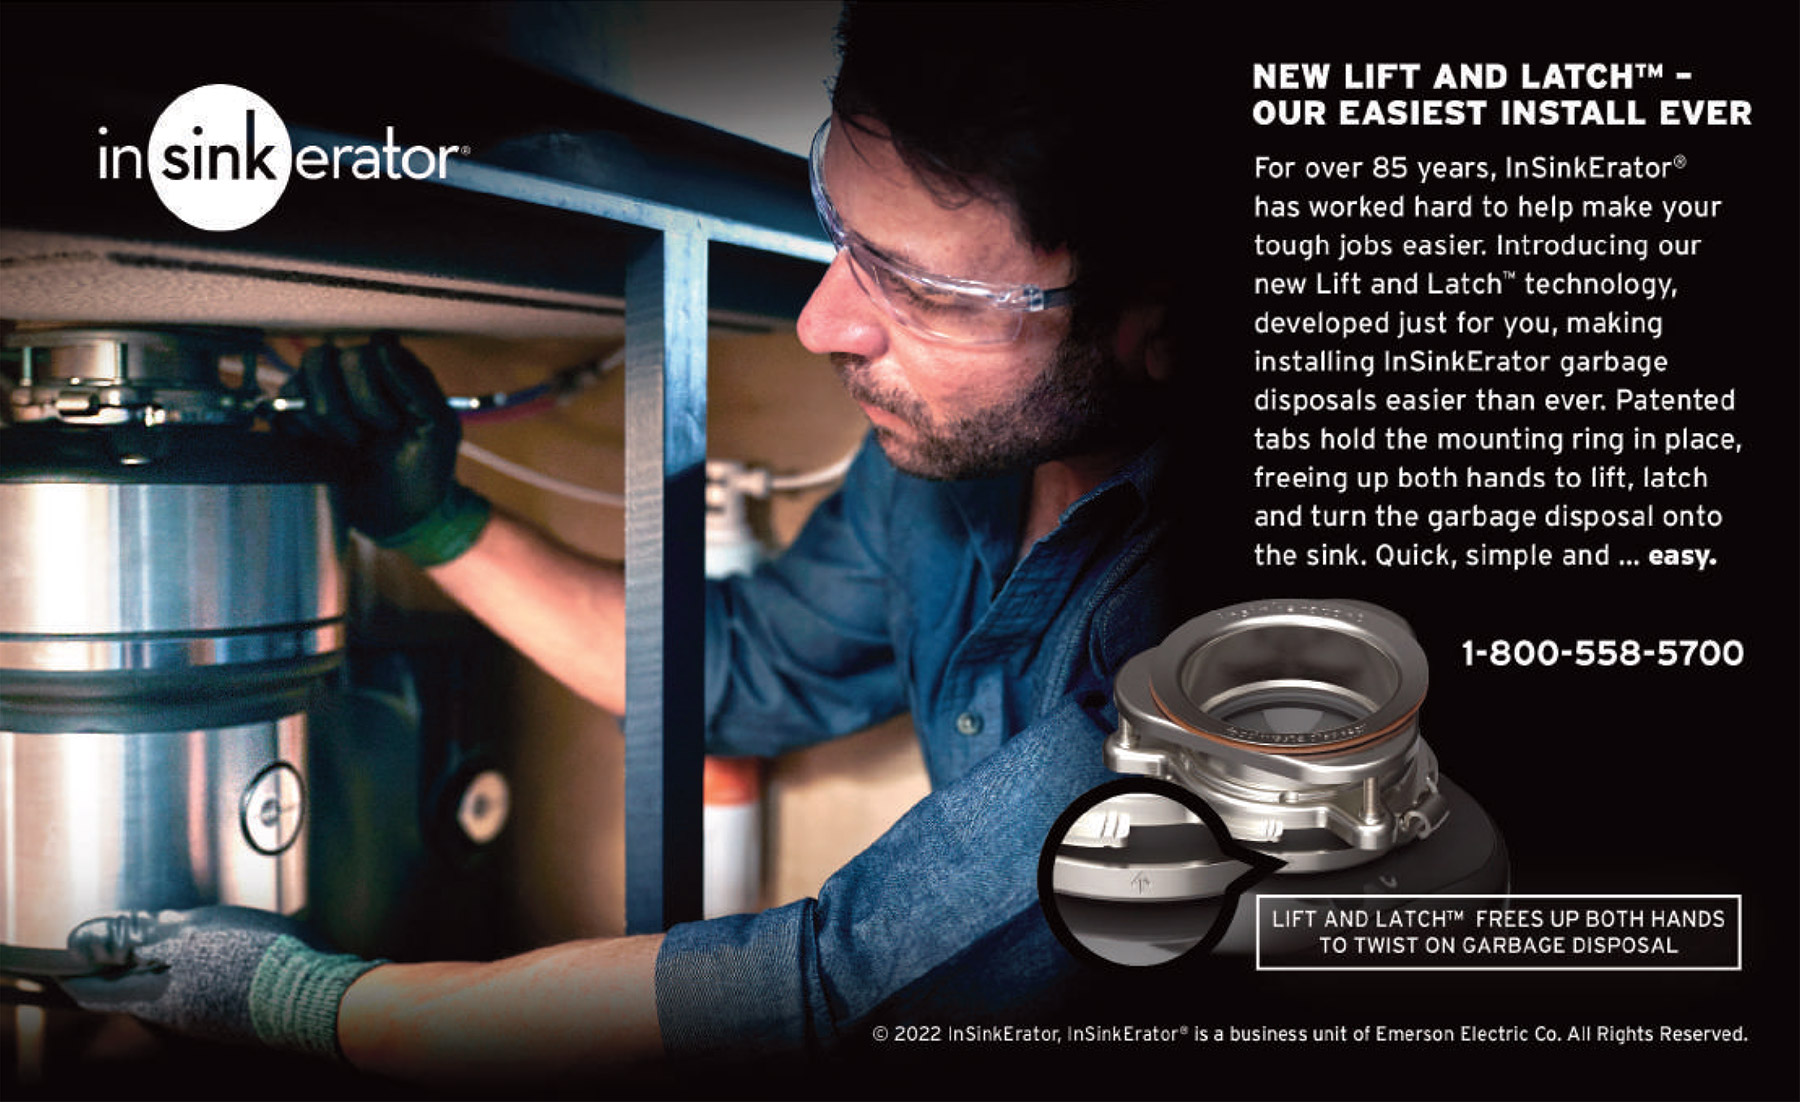 New Lift and Latch™ - Our Easiest Install Ever, For over 85 years, InSinkErator has worked hard to help make your tough jobs easier. Introducing our new Lift and Latch™ technology, developed just for you, making installing InSinkErator garbage disposals easier than ever. Patented tabs hold the mounting ring in place, freeing up both hands to lift, latch and turn the garbage disposal onto the sink. Quick, simple and ... easy.